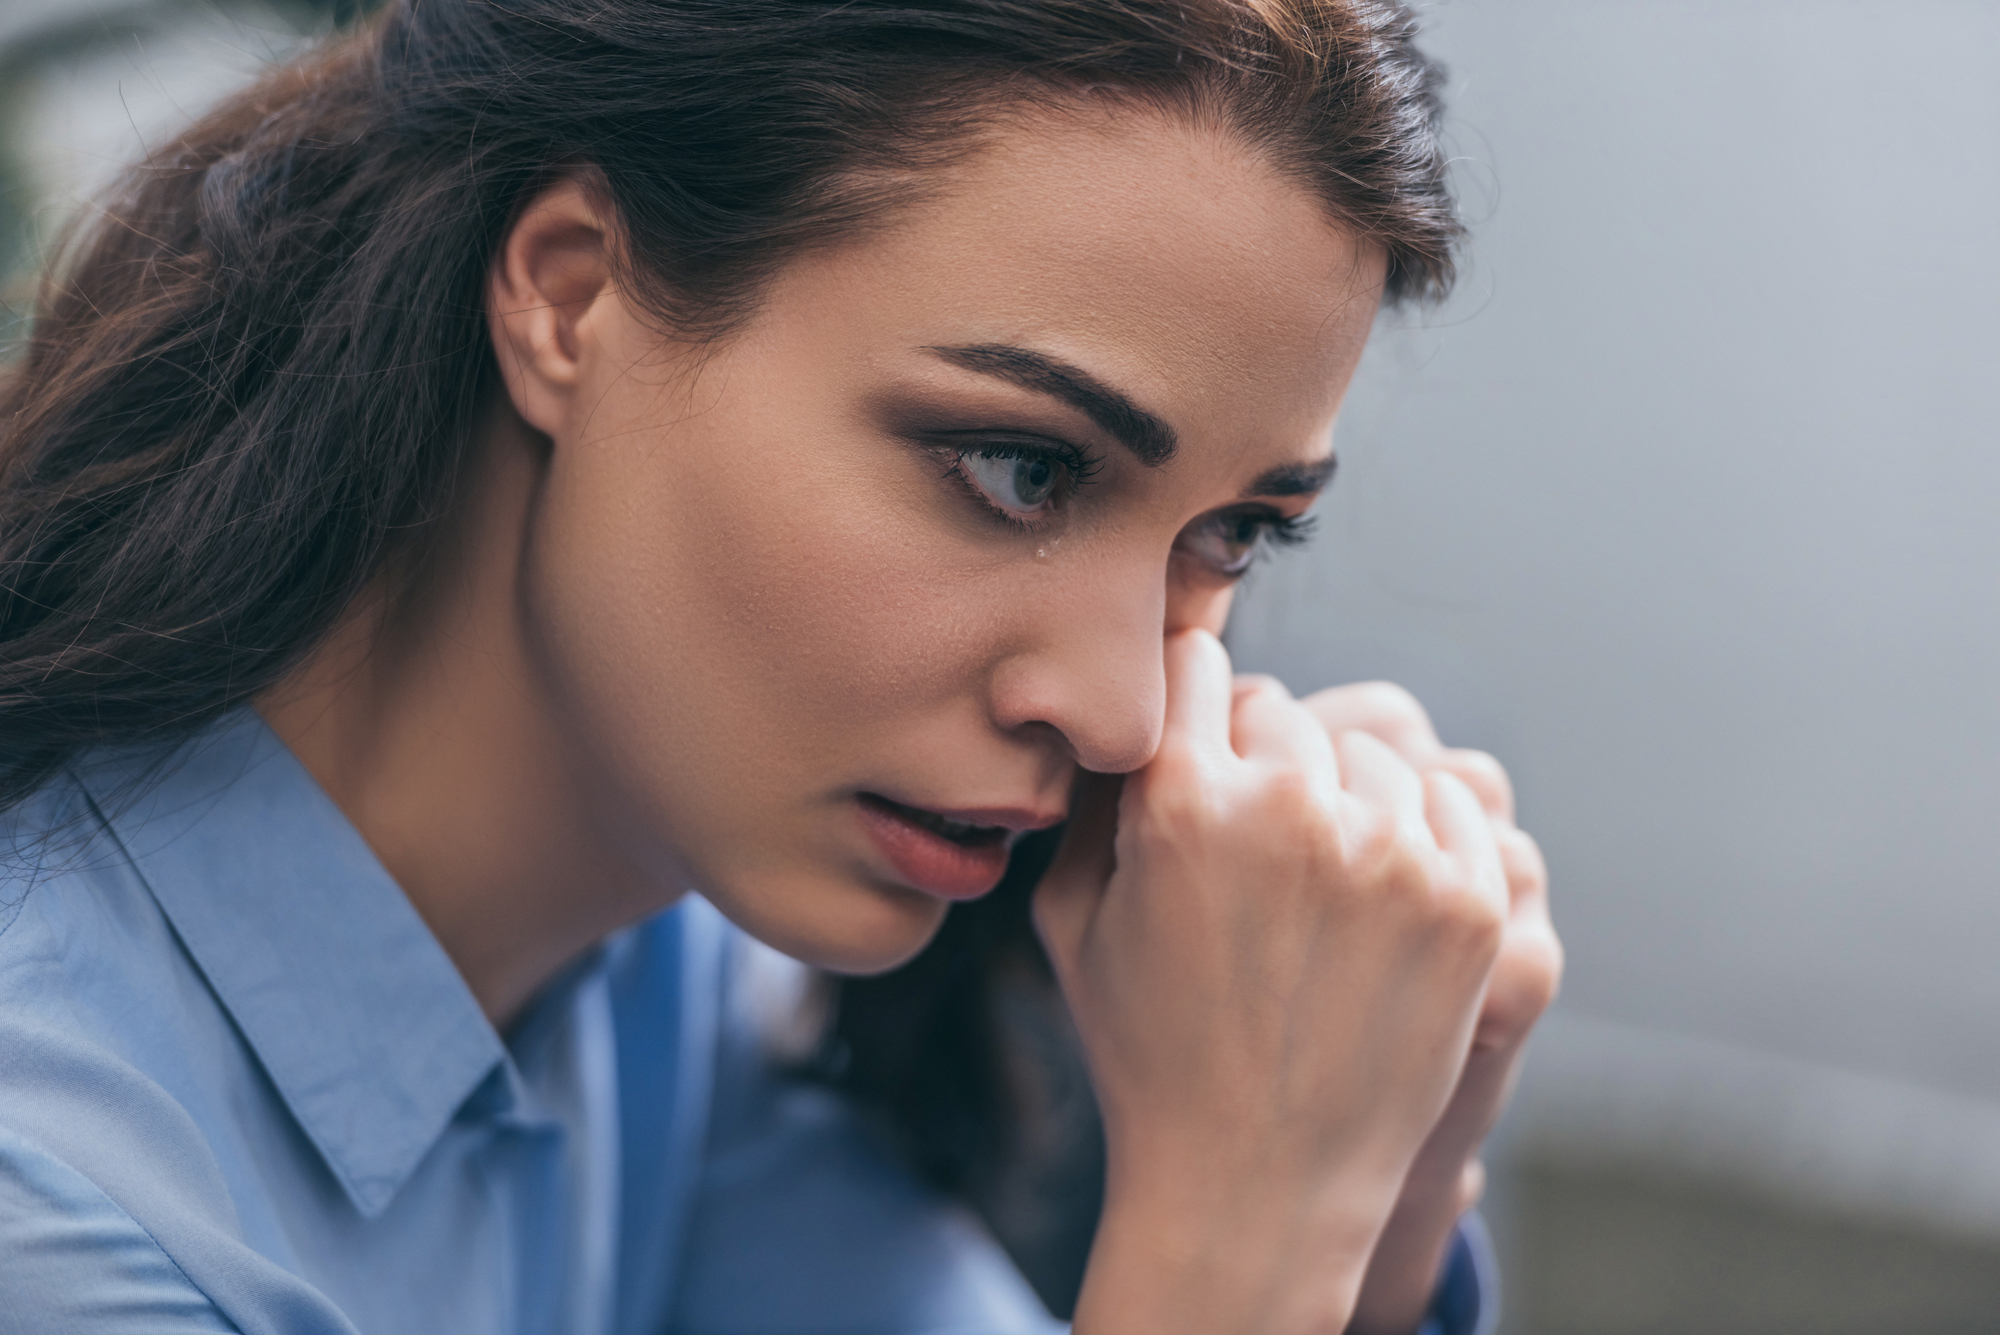 A close-up of a woman with long dark hair and a blue shirt. She looks pensive and concerned, resting her chin on her clasped hands while gazing into the distance, deep in thought. The background is blurred, emphasizing her expression and emotions.